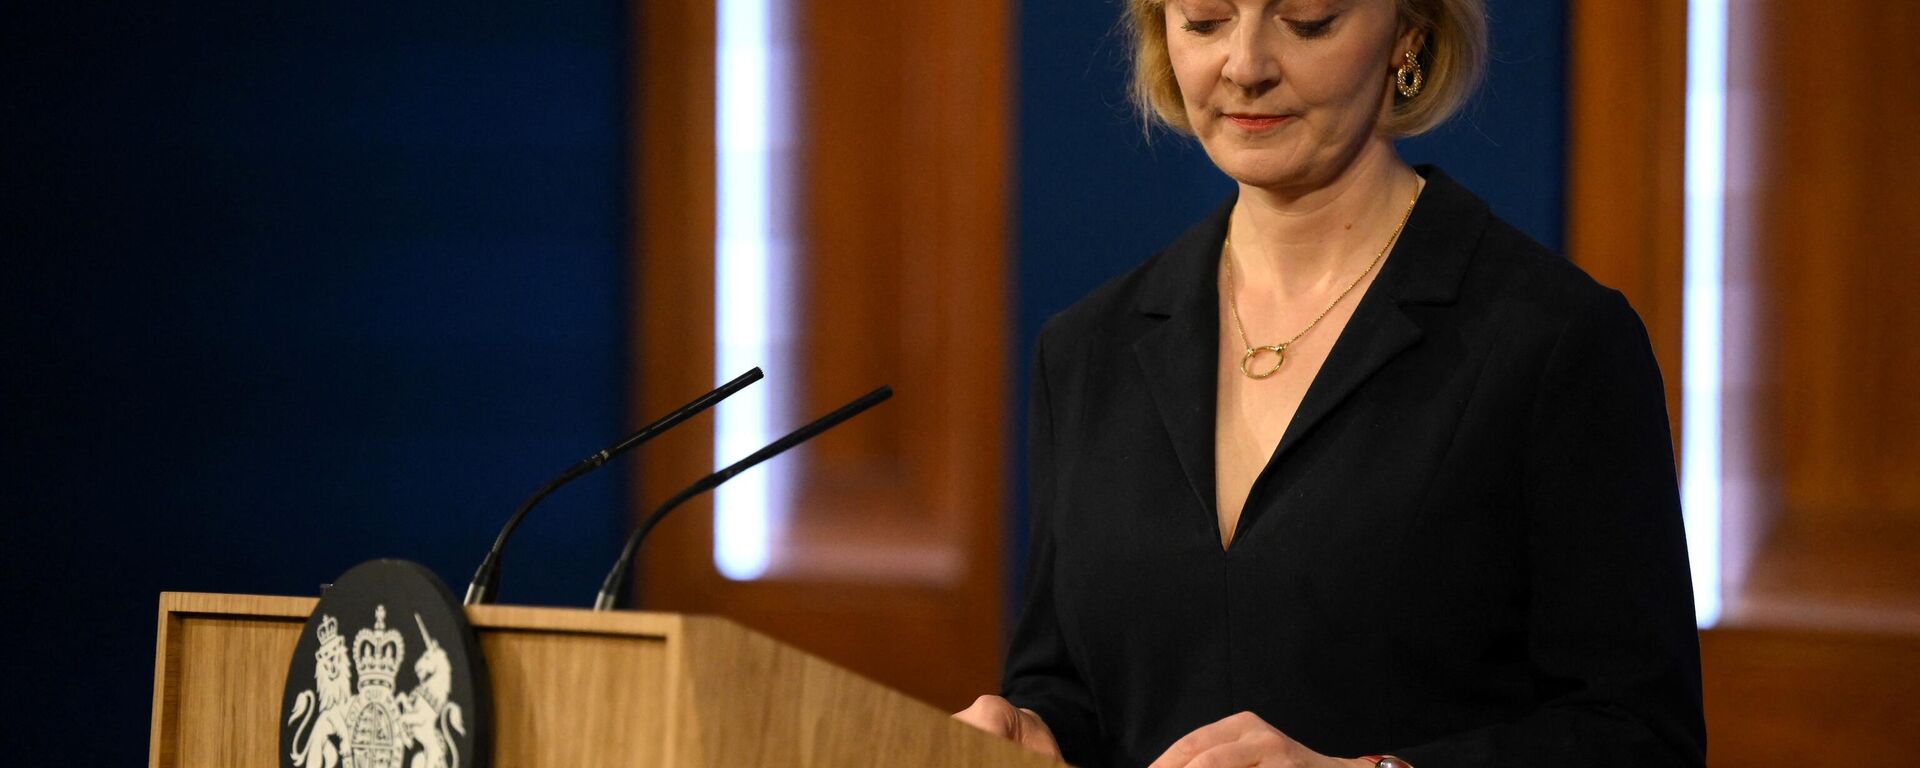 Britain's Prime Minister Liz Truss looks down during a press conference in the Downing Street Briefing Room in central London on October 14, 2022 - Sputnik International, 1920, 17.10.2022